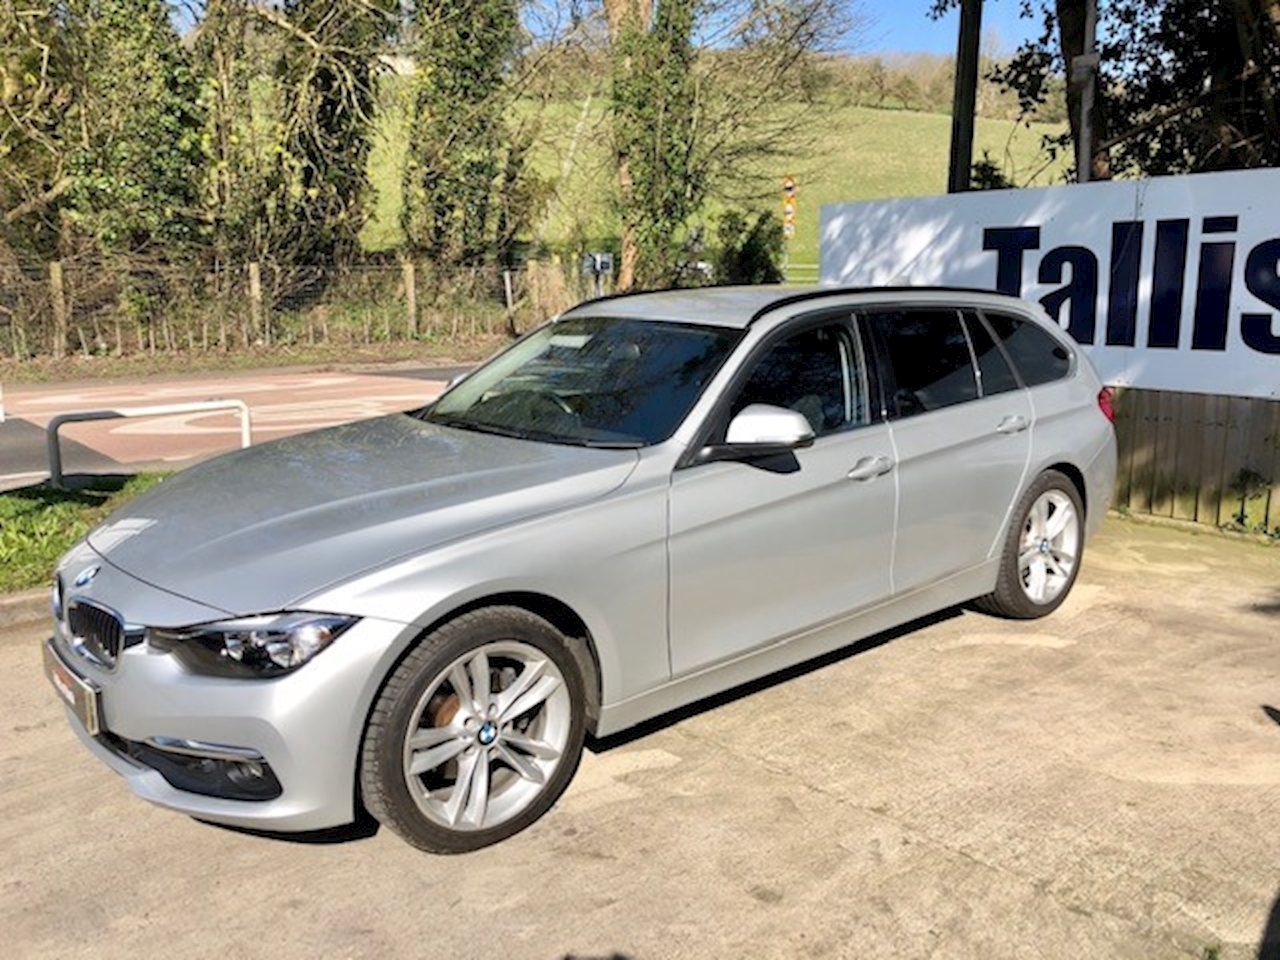 3 Series 320D Luxury Touring Estate 2.0 Automatic Diesel